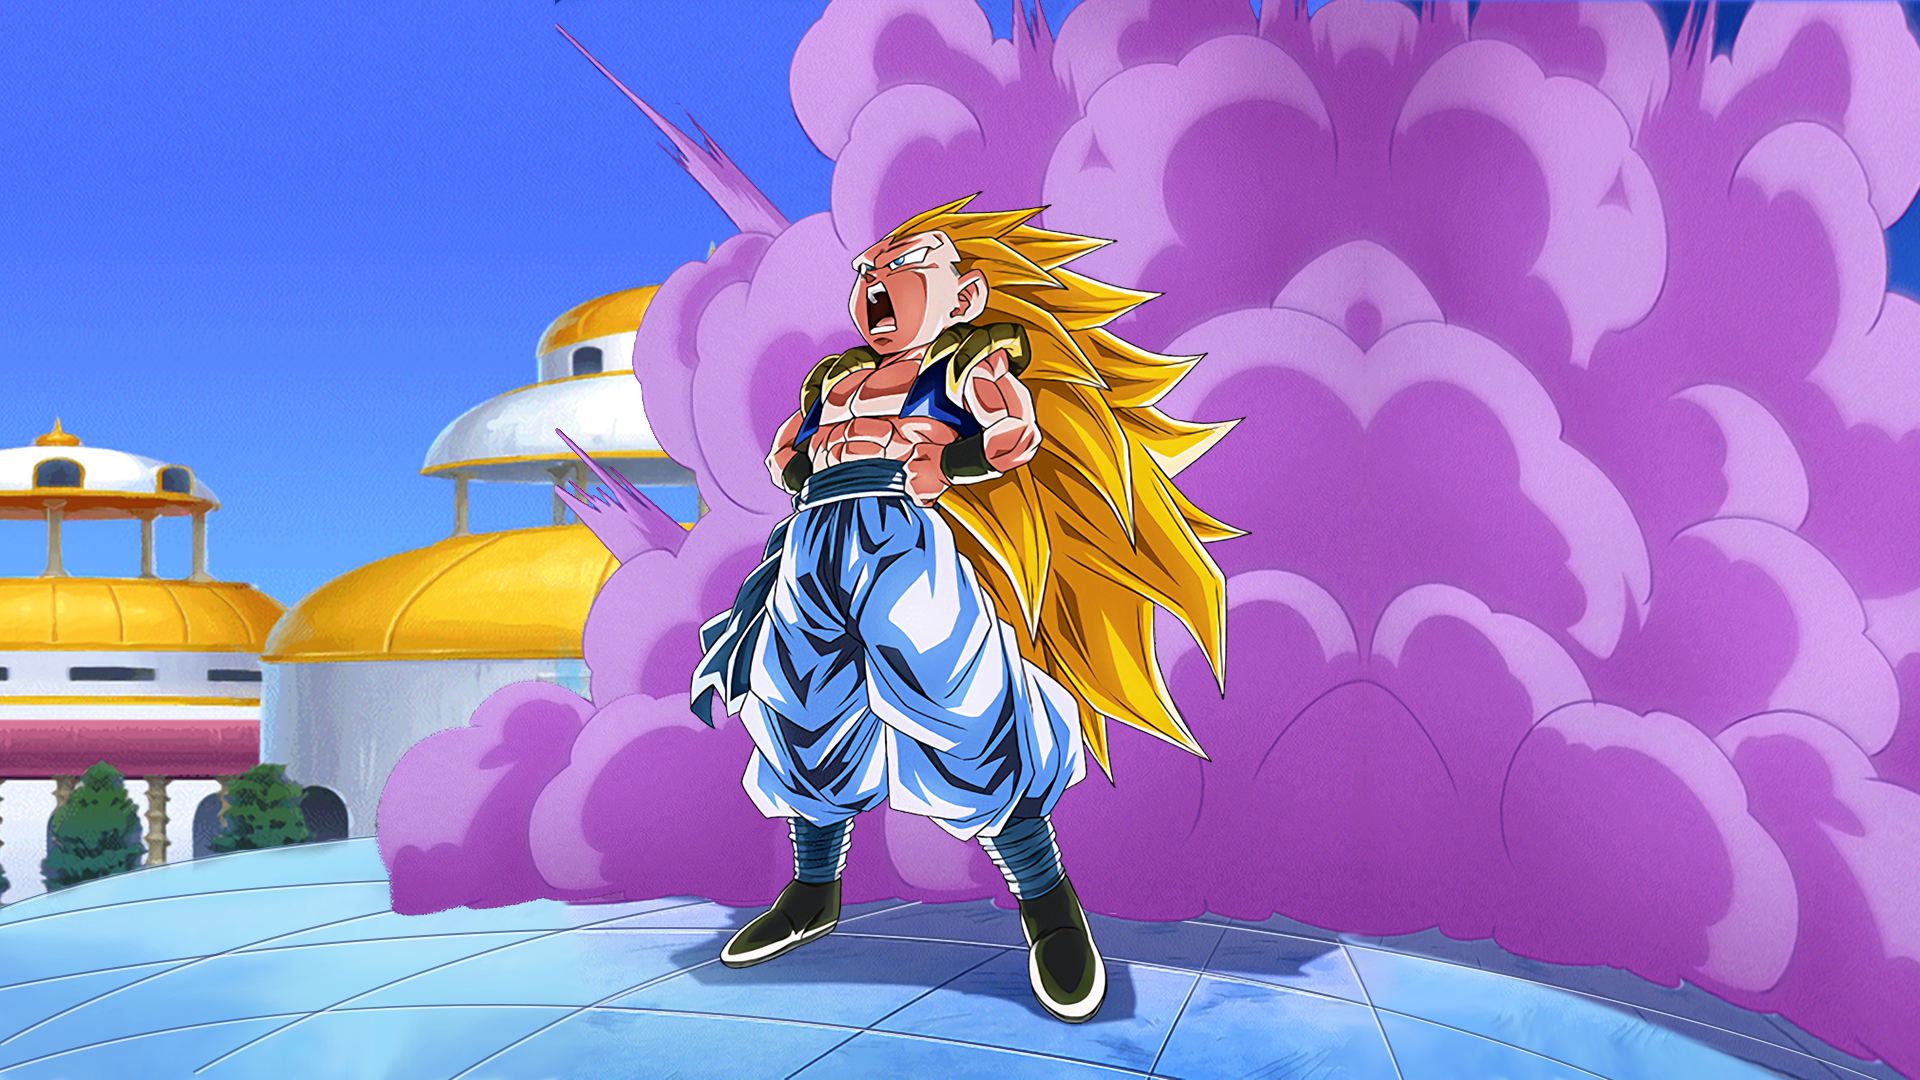 I made a PC wallpapers for my favorite fusion, Gotenks! 